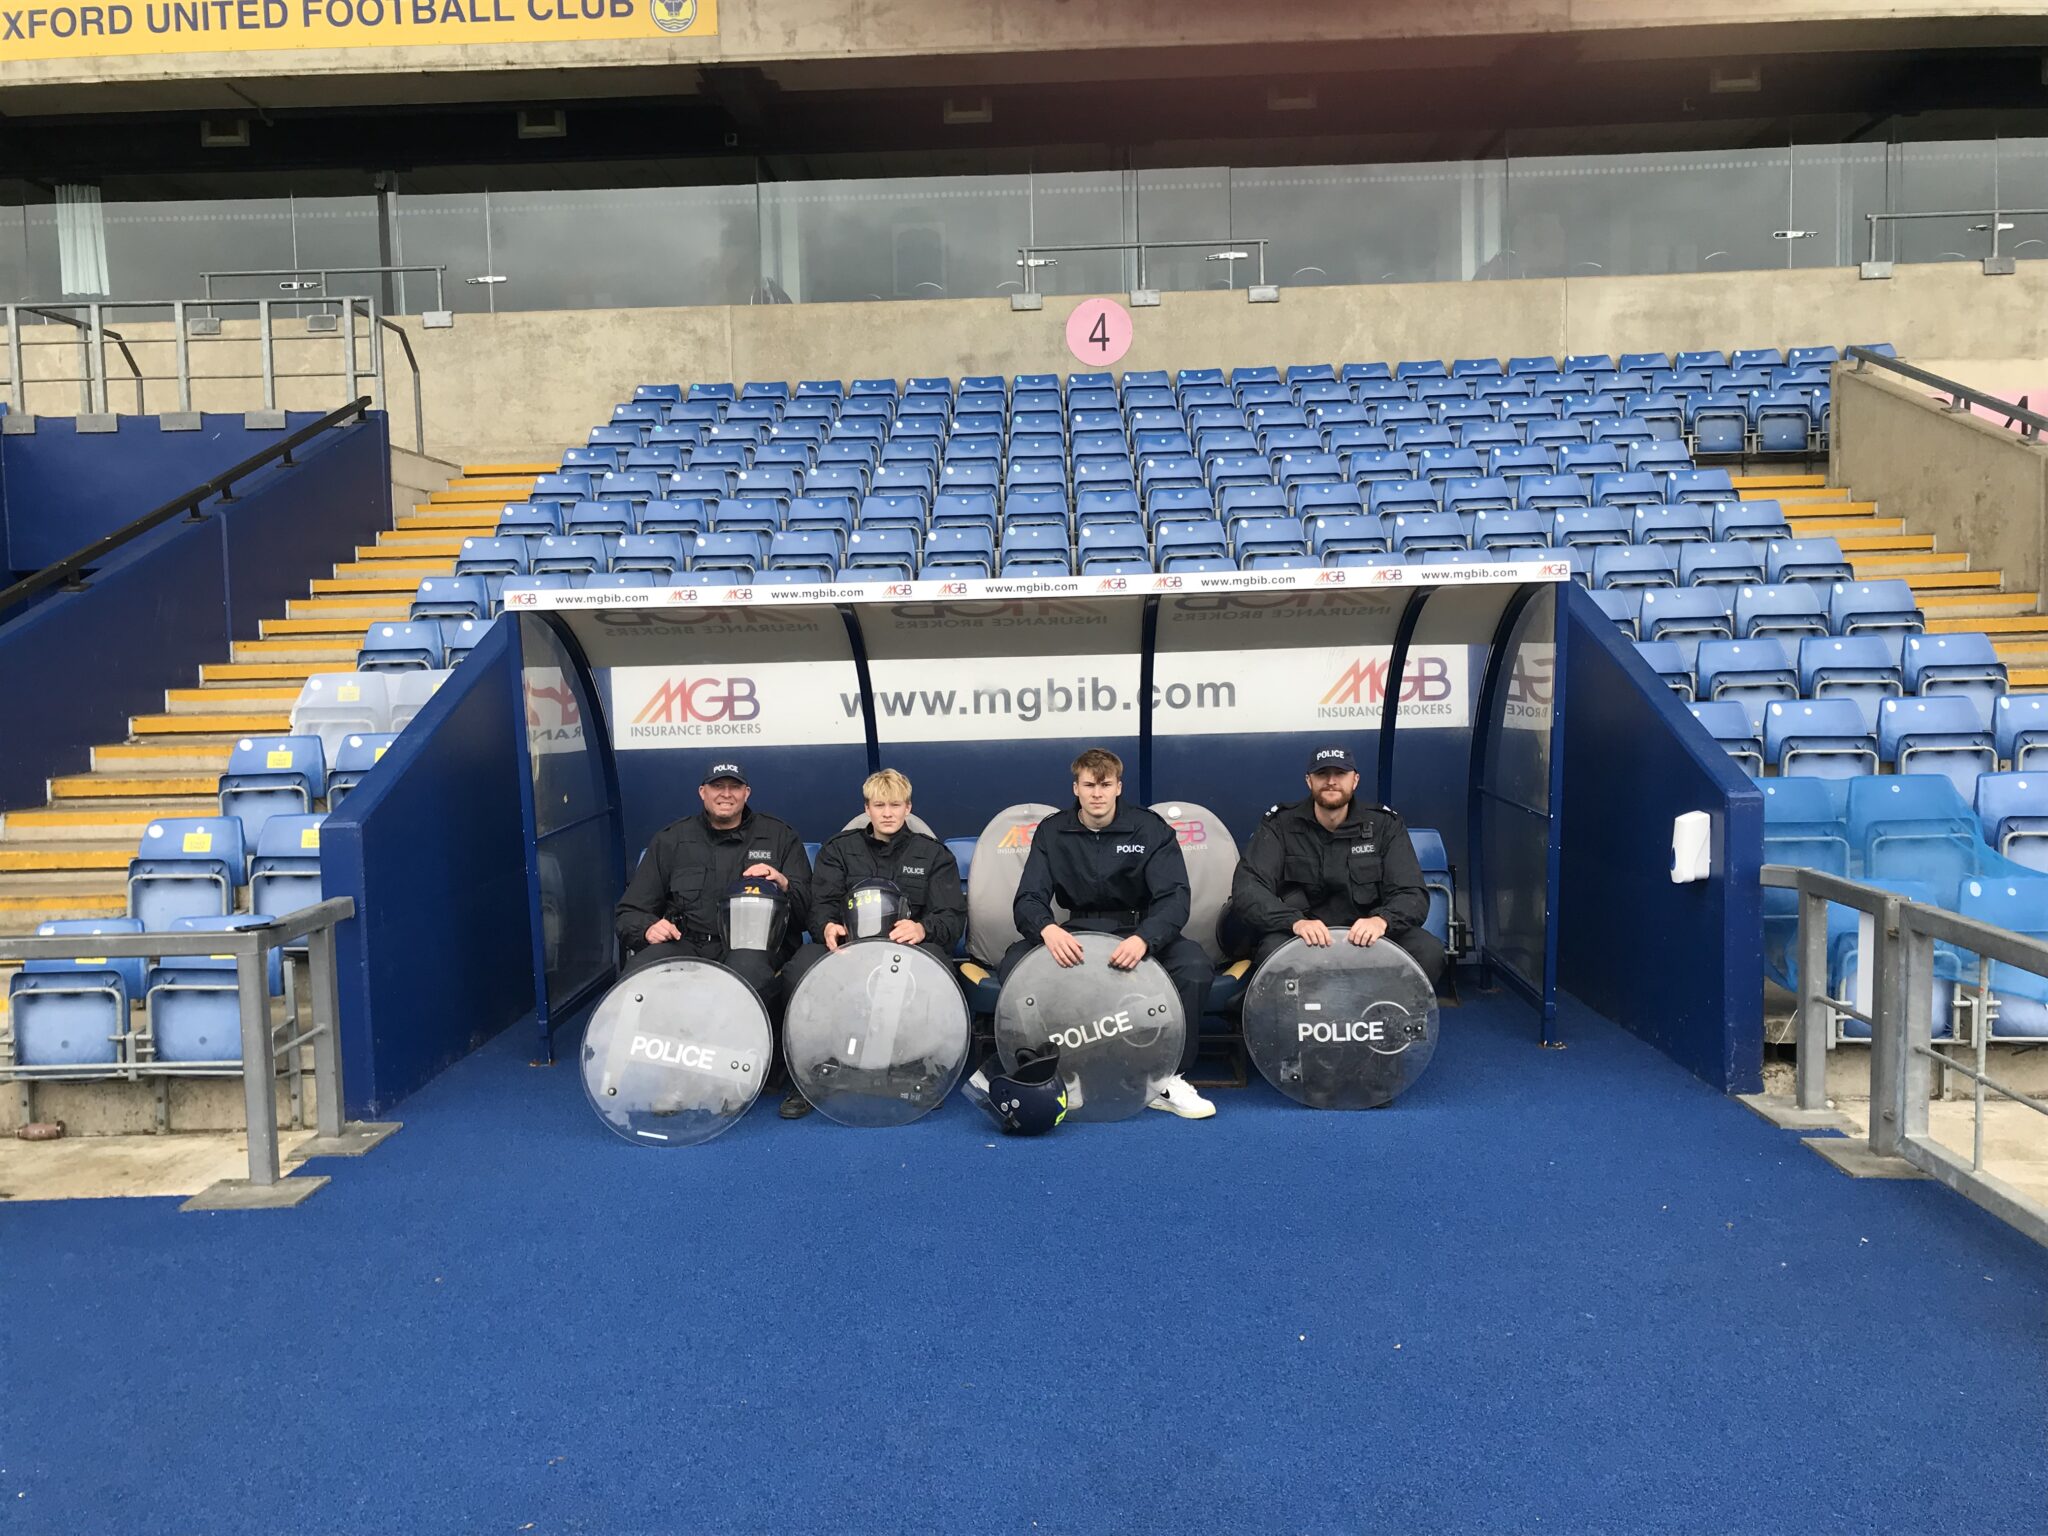 A group of 4 TVP sitting in the dugout of the Oxford United stadium